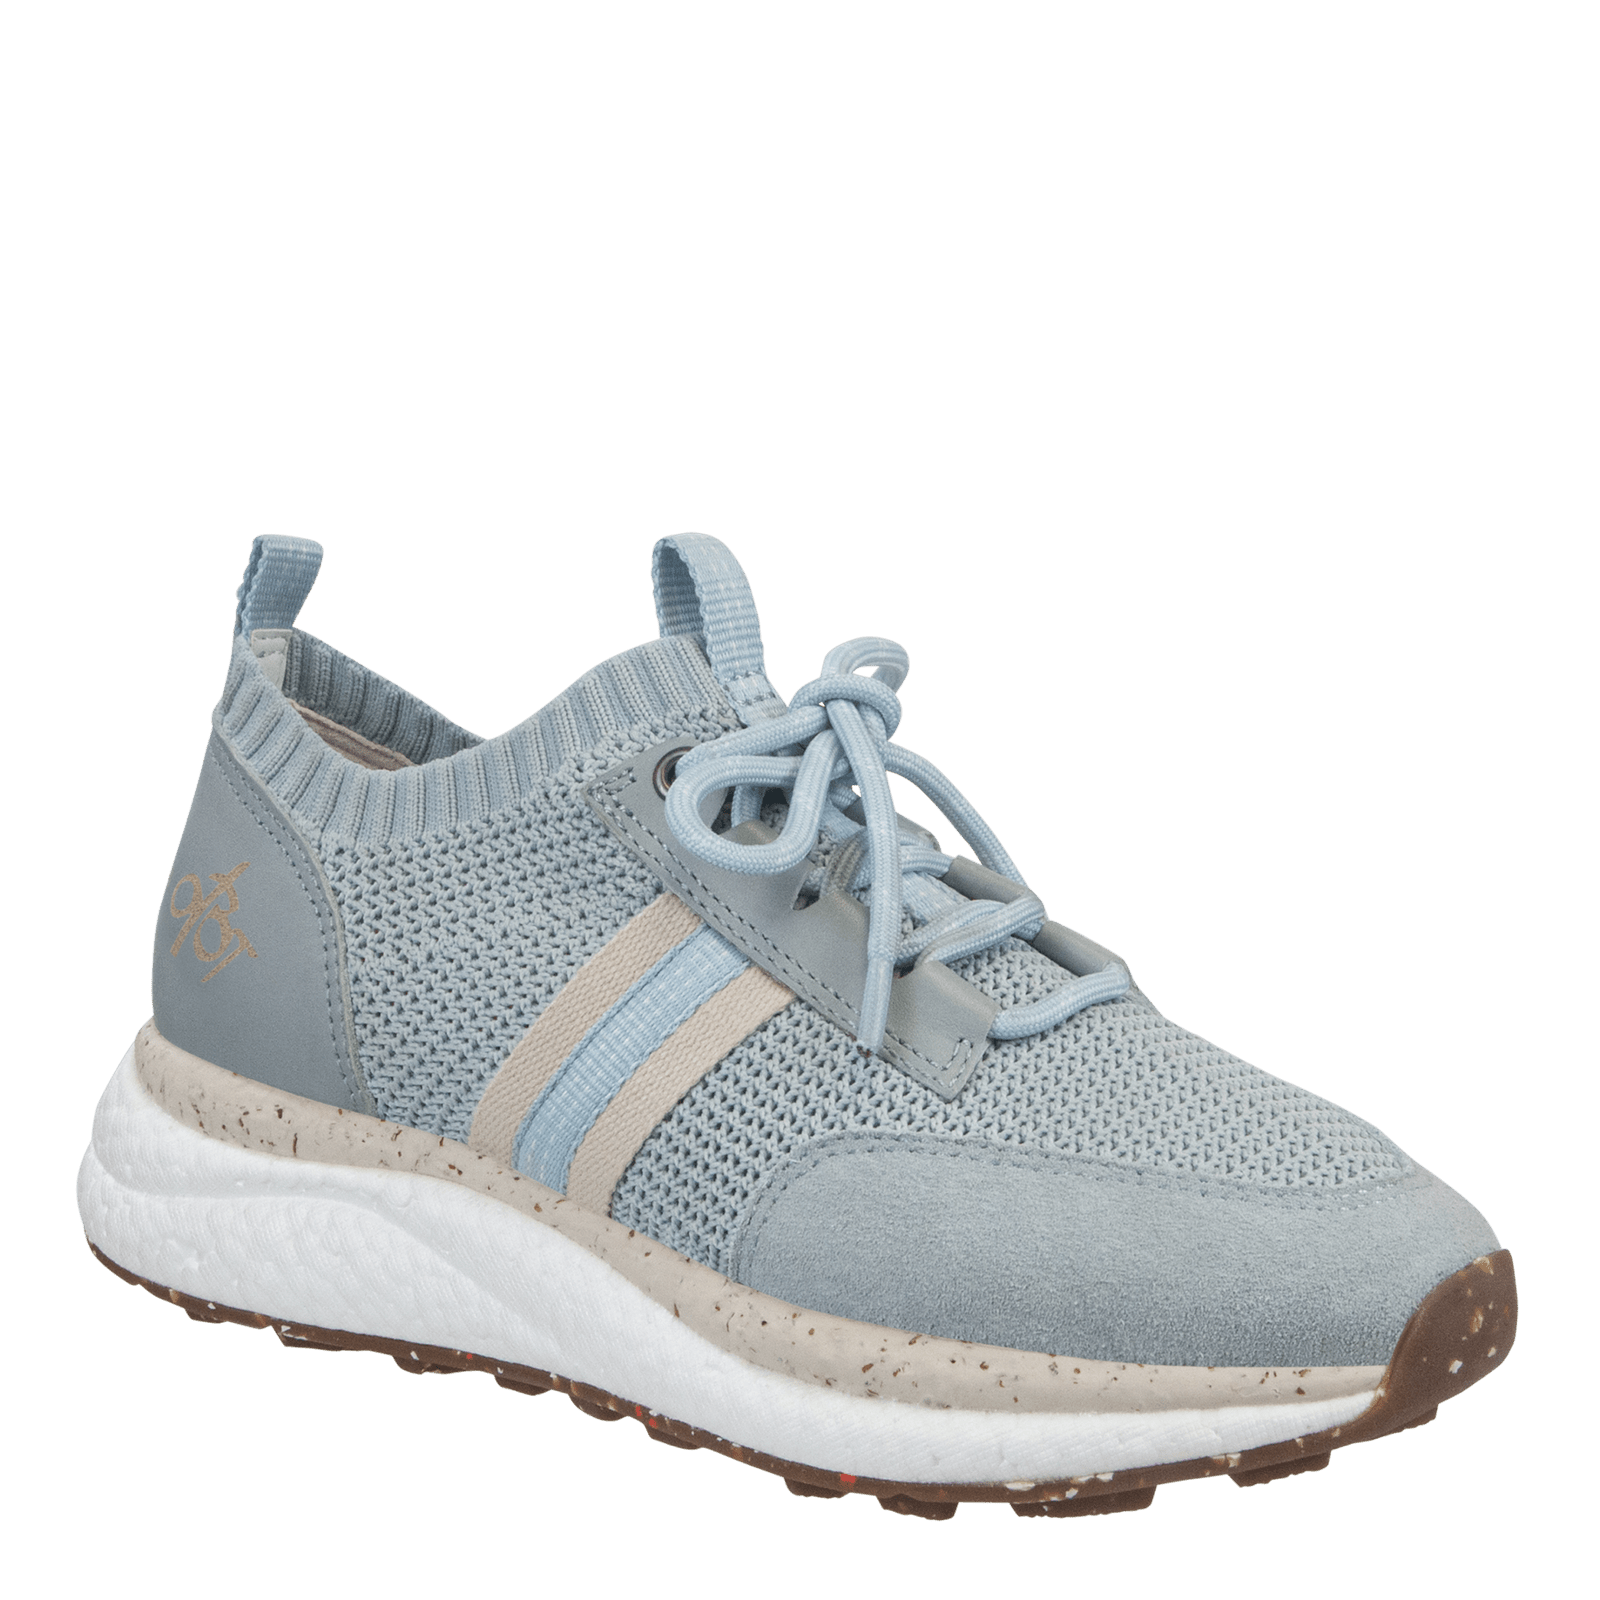 Hybrid in Chamois Sneakers  Women's Shoes by OTBT - OTBT shoes